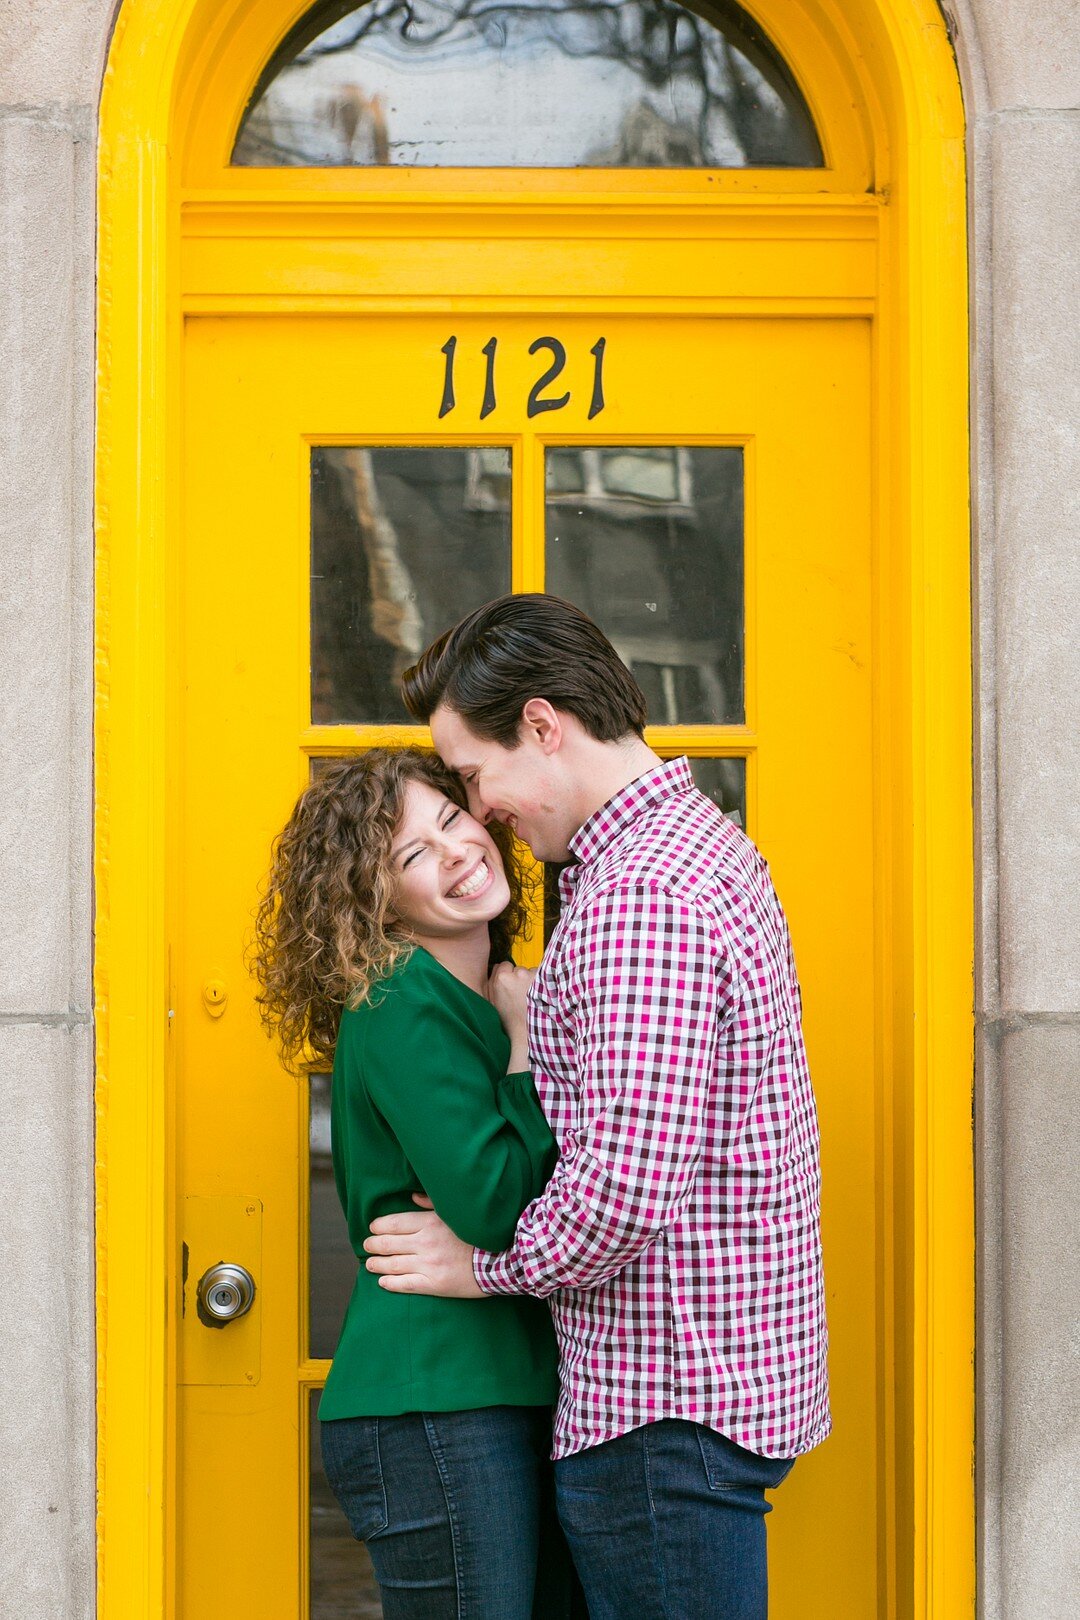 Romantic Winter Chicago Engagement Session captured by Andrejka Photography. See more engagement session ideas at CHItheeWED.com!